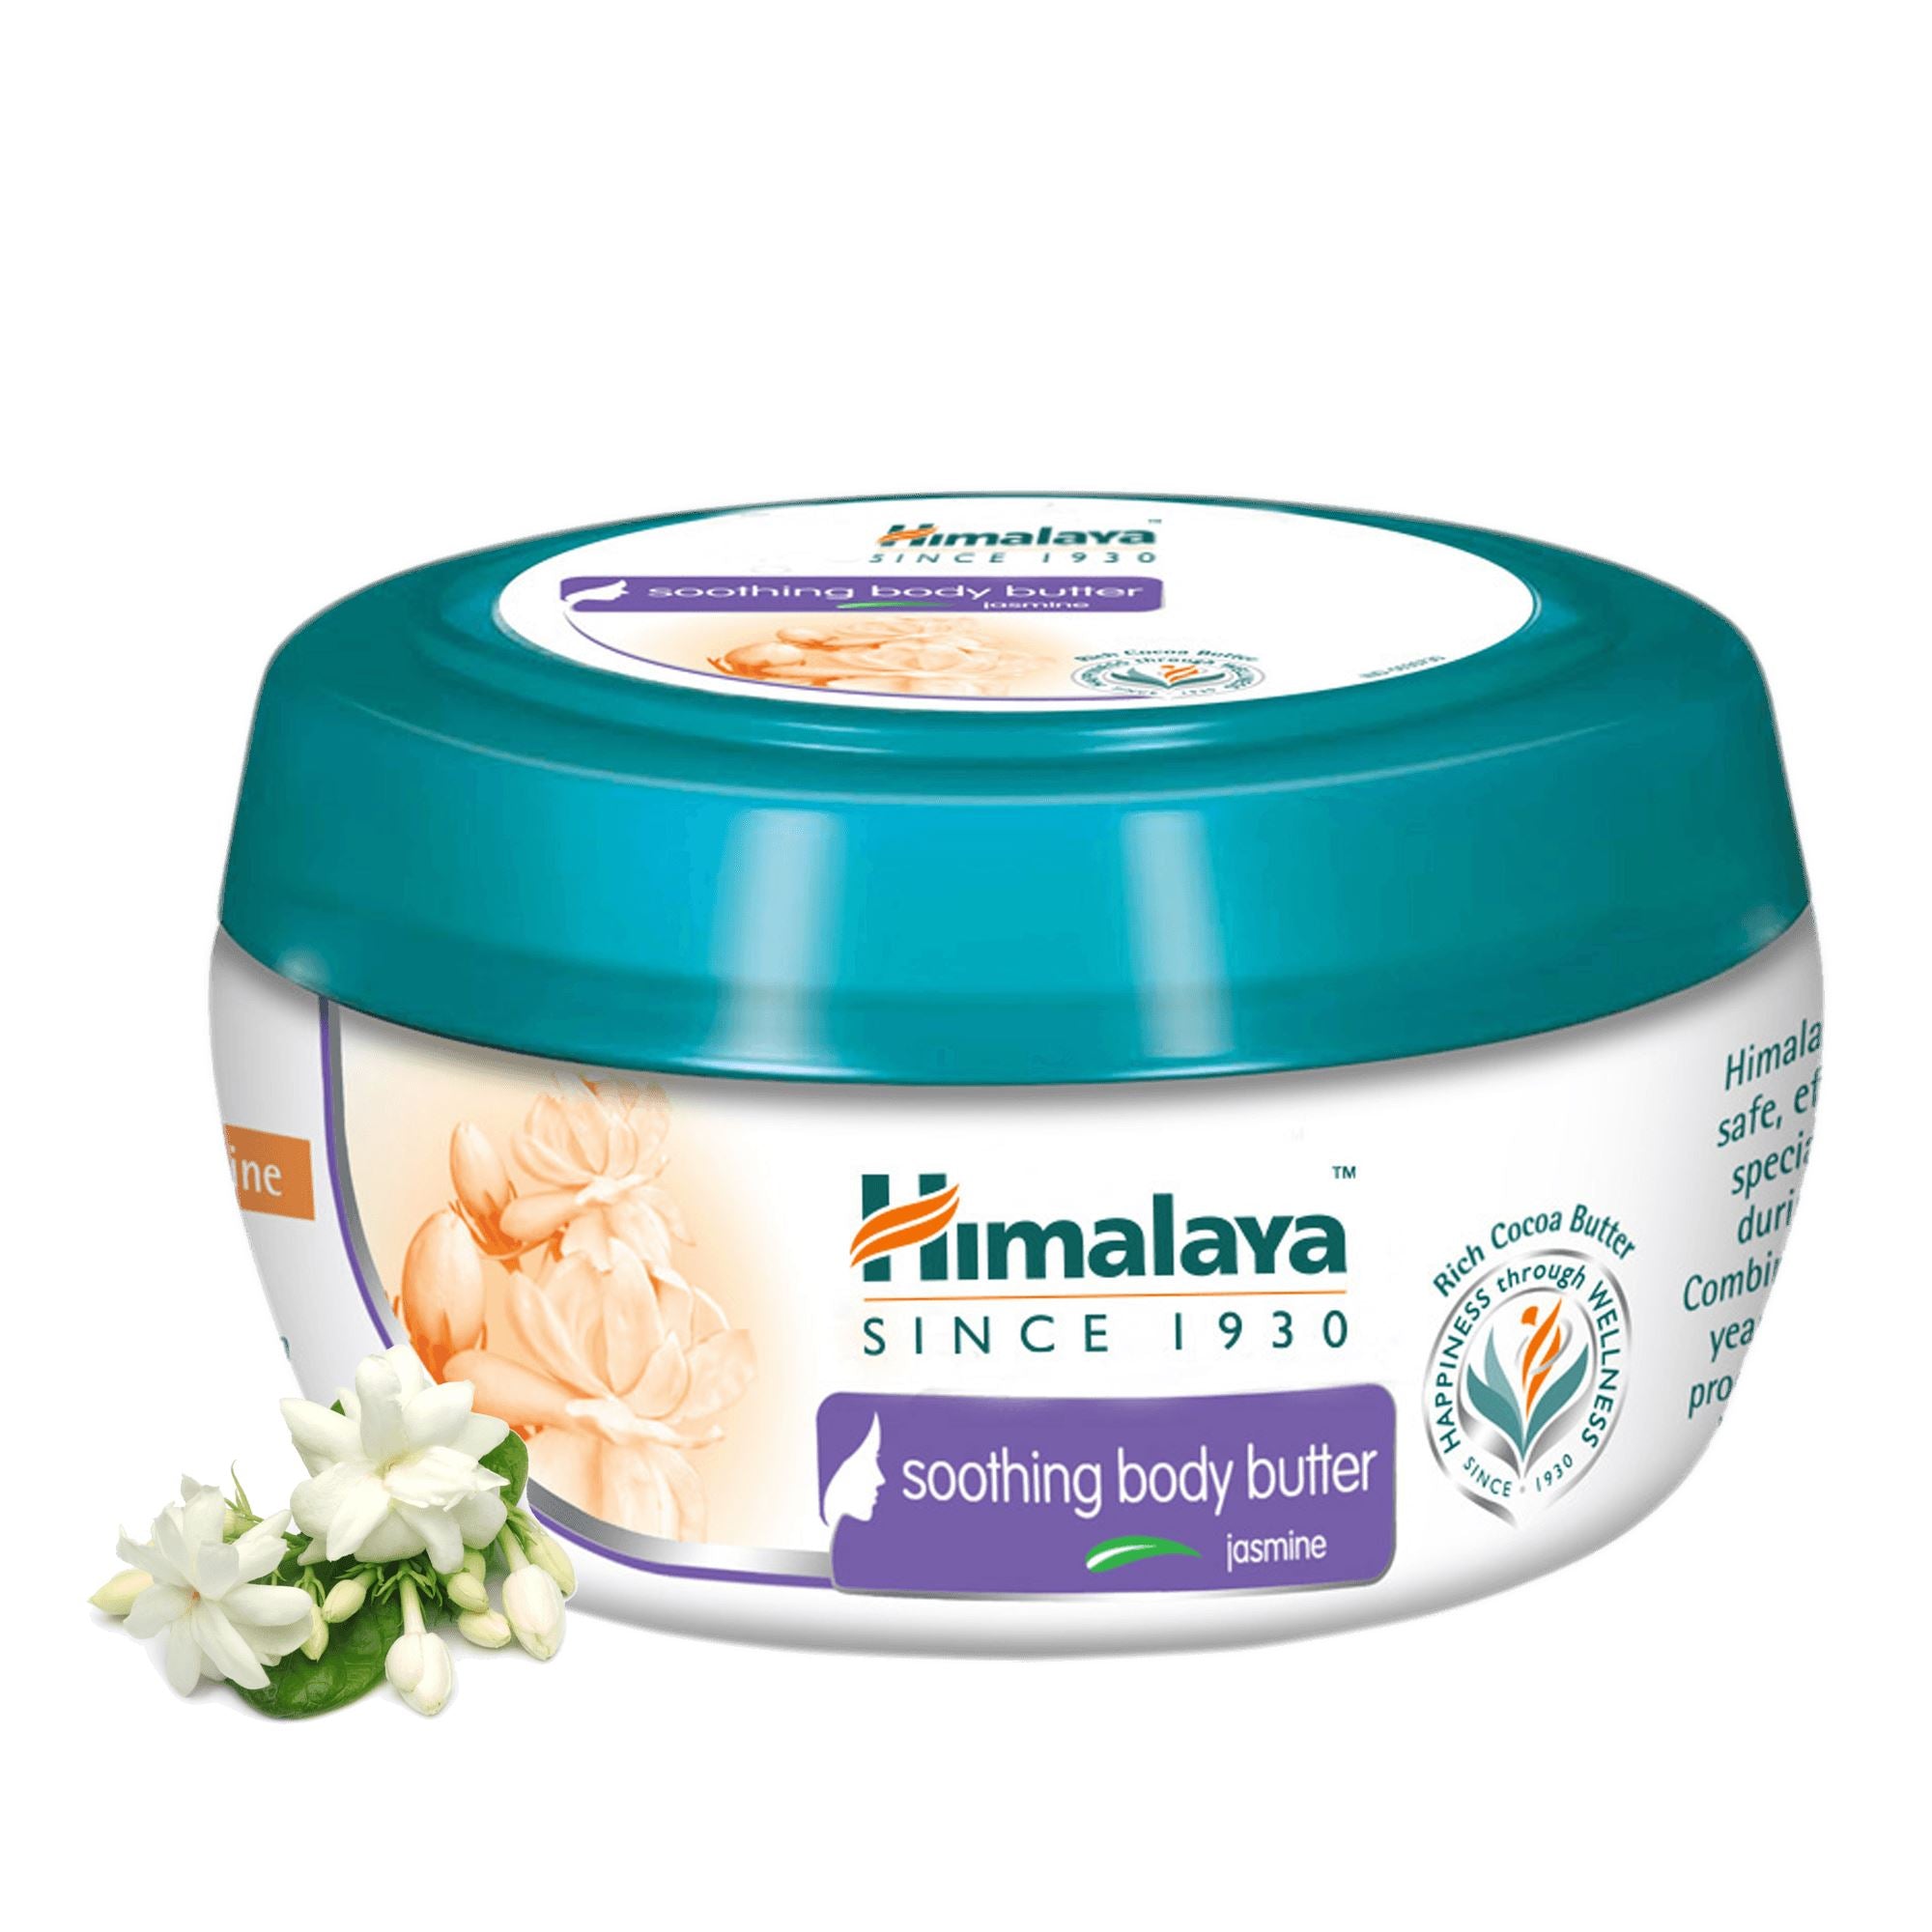 Himalaya soothing body butter cream Jasmine - Soothes and nourishes skin